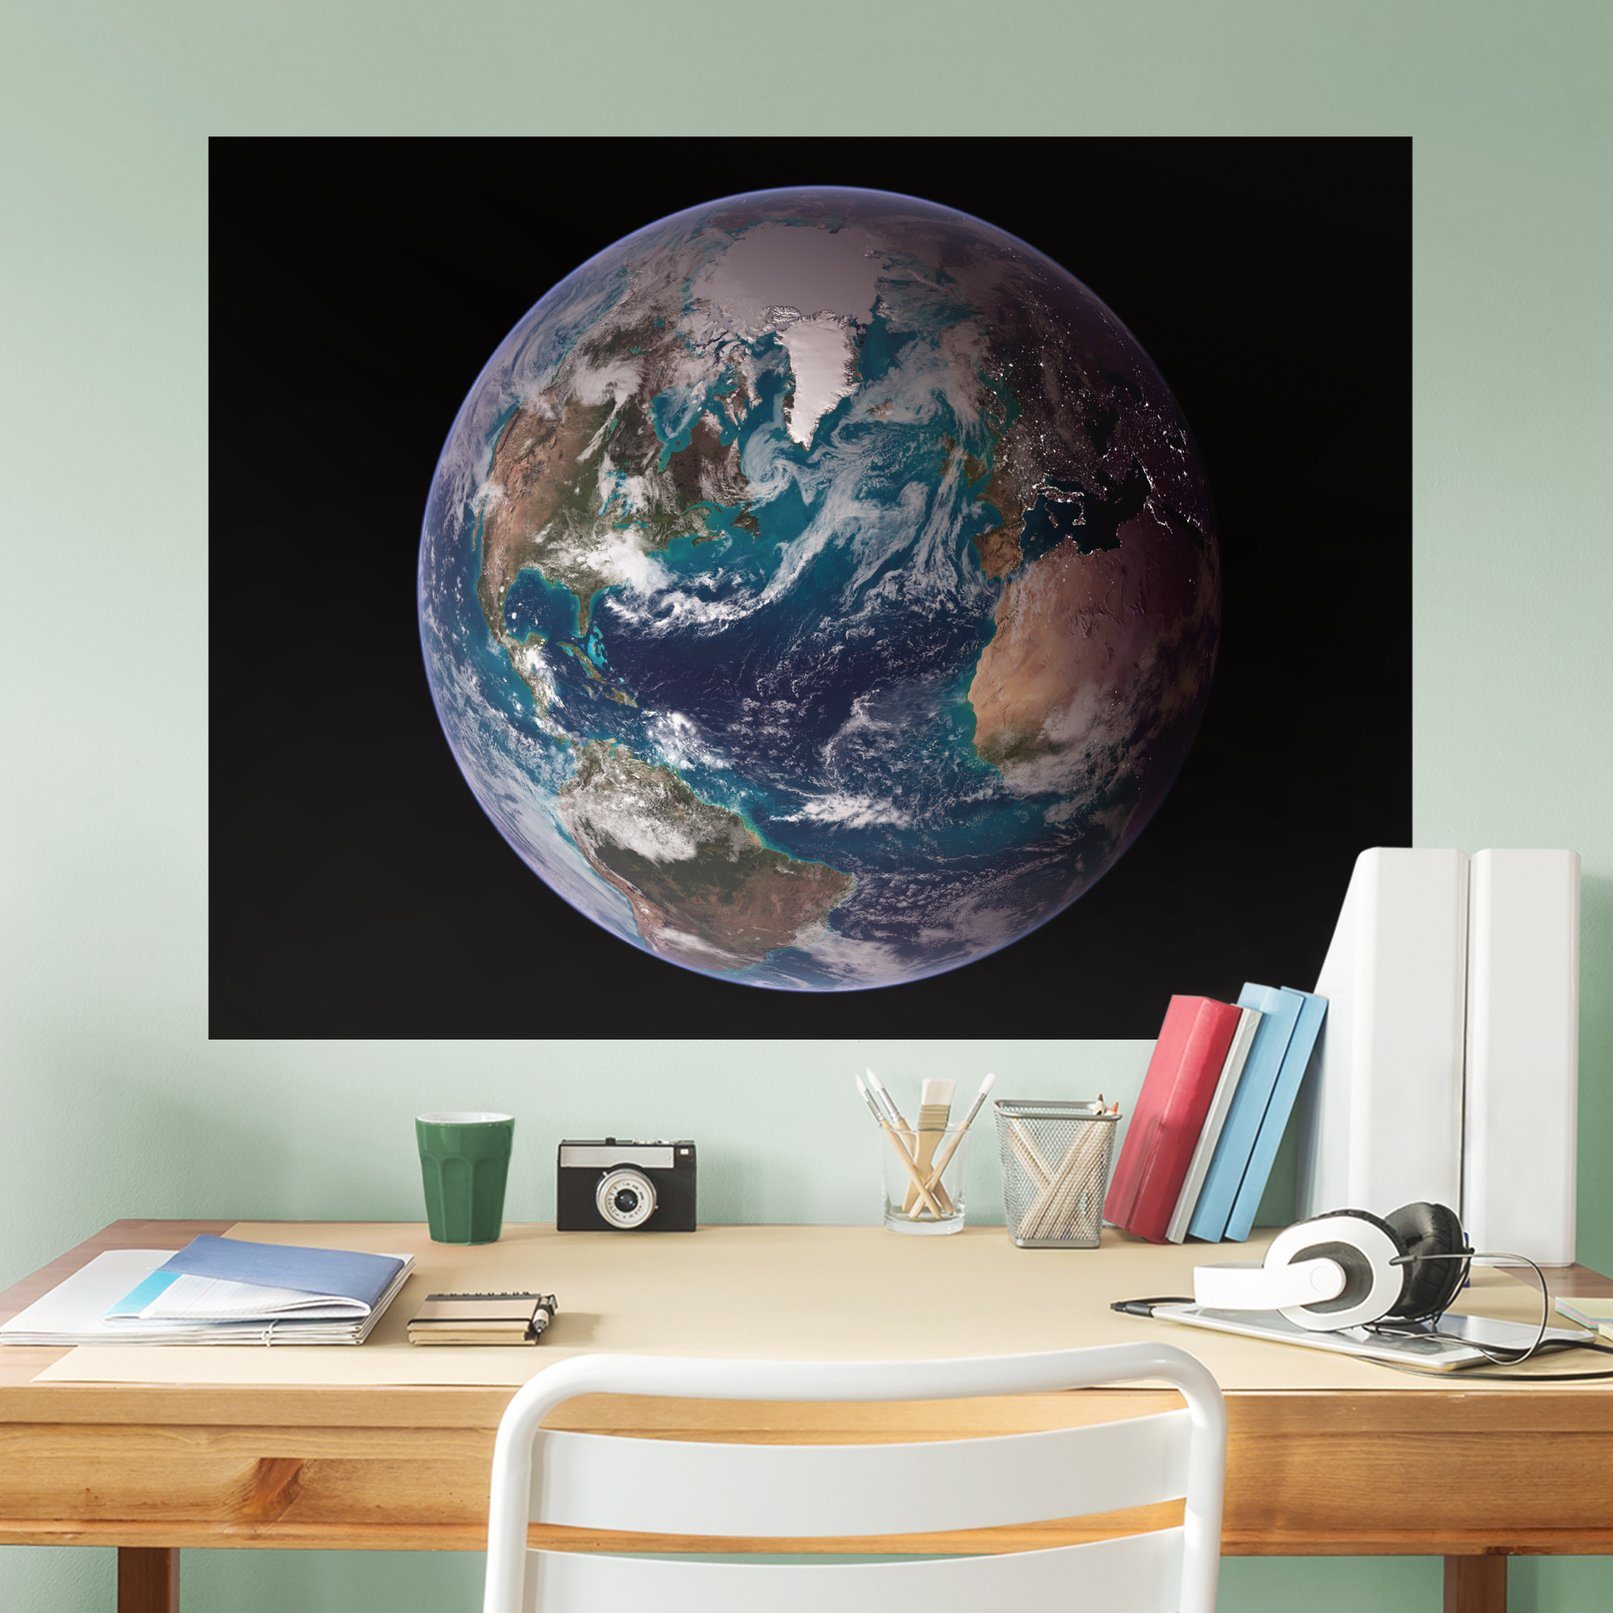 https://fathead.com/collections/space-exploration/products/m1019-00020?variant=33141966831704